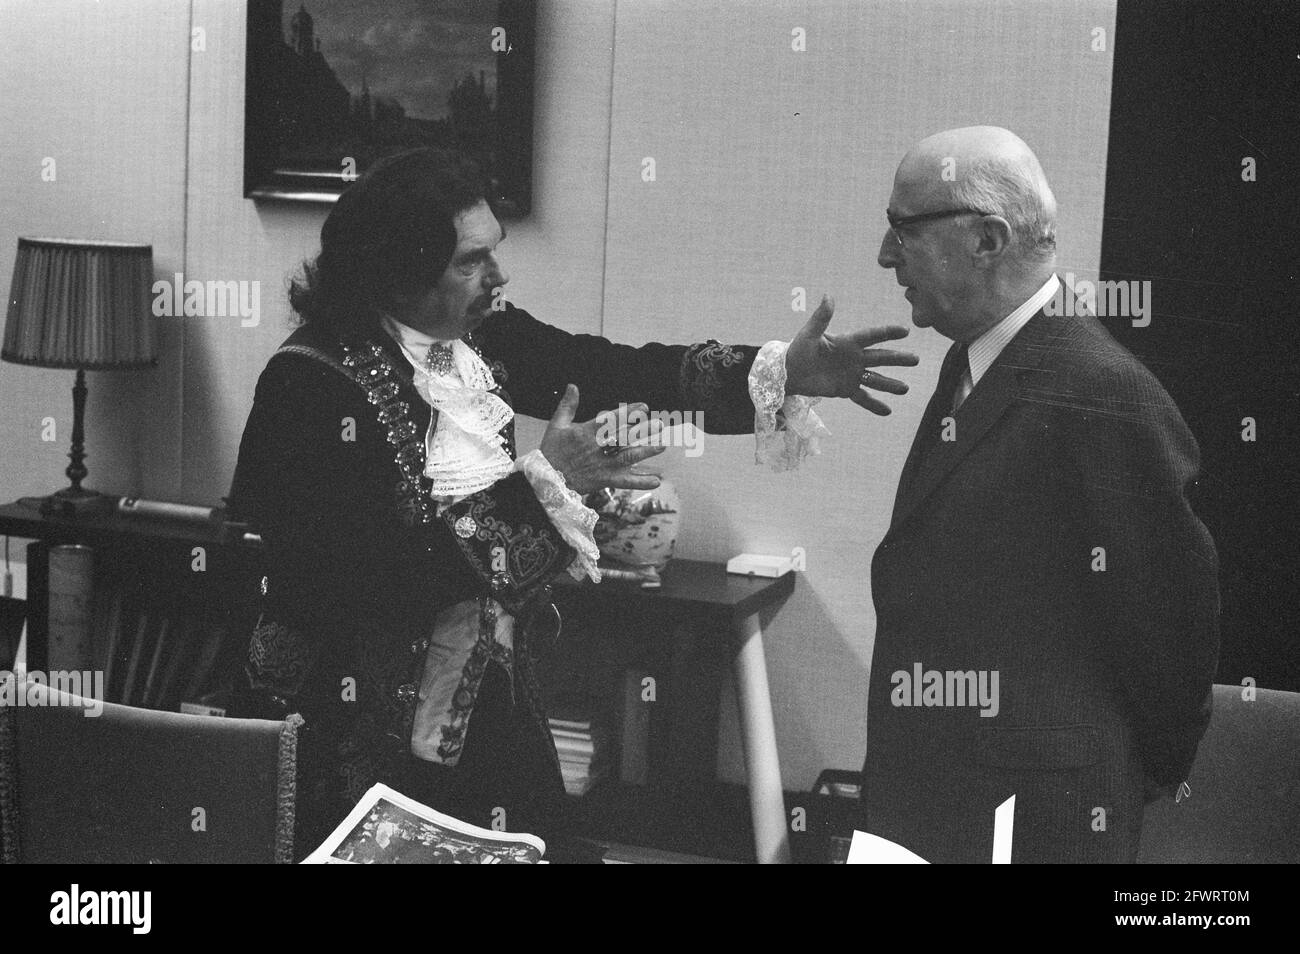 Czaar Peter ( ir. K. K. van Hoffen of Stork werkspoor Diesel) received by Mayor Samkalden at town hall, 28 September 1972, receptions, town halls, The Netherlands, 20th century press agency photo, news to remember, documentary, historic photography 1945-1990, visual stories, human history of the Twentieth Century, capturing moments in time Stock Photo